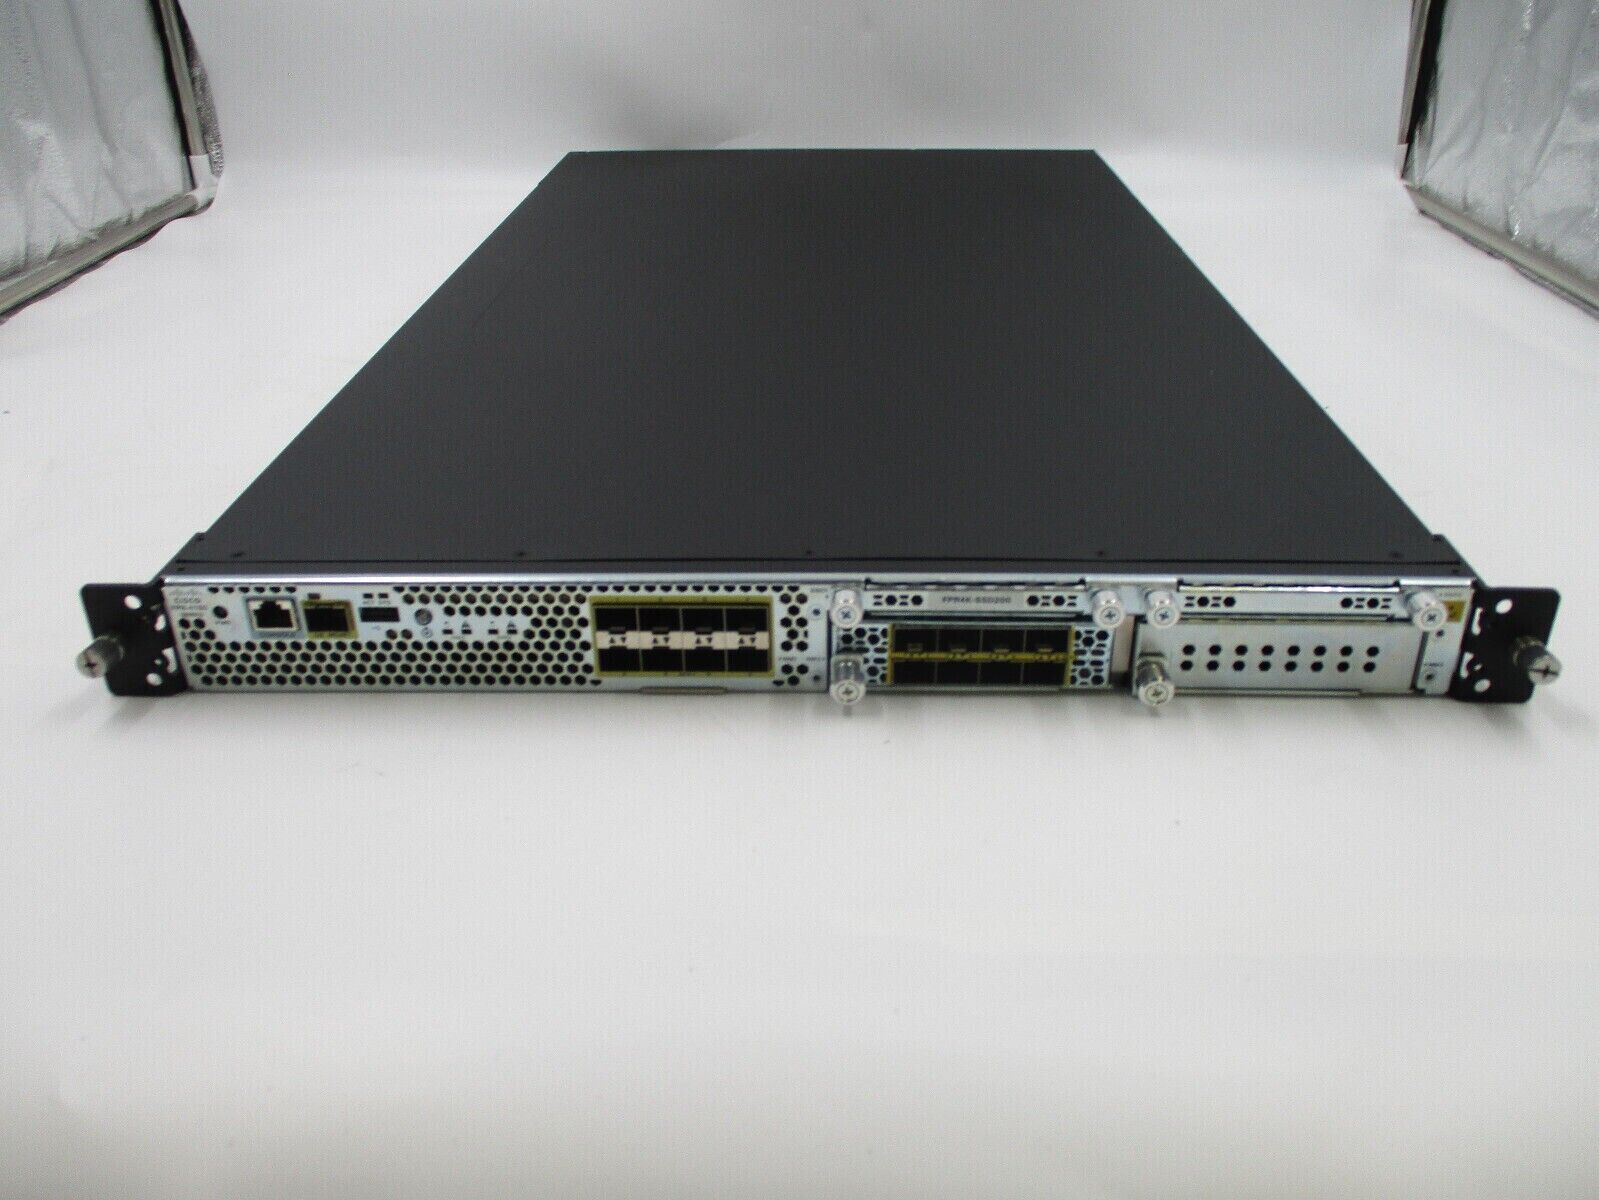 Cisco Firepower FPR4145-NGIPS-K9 - Security Appliance + FPR-NM-8X10G NO SSD